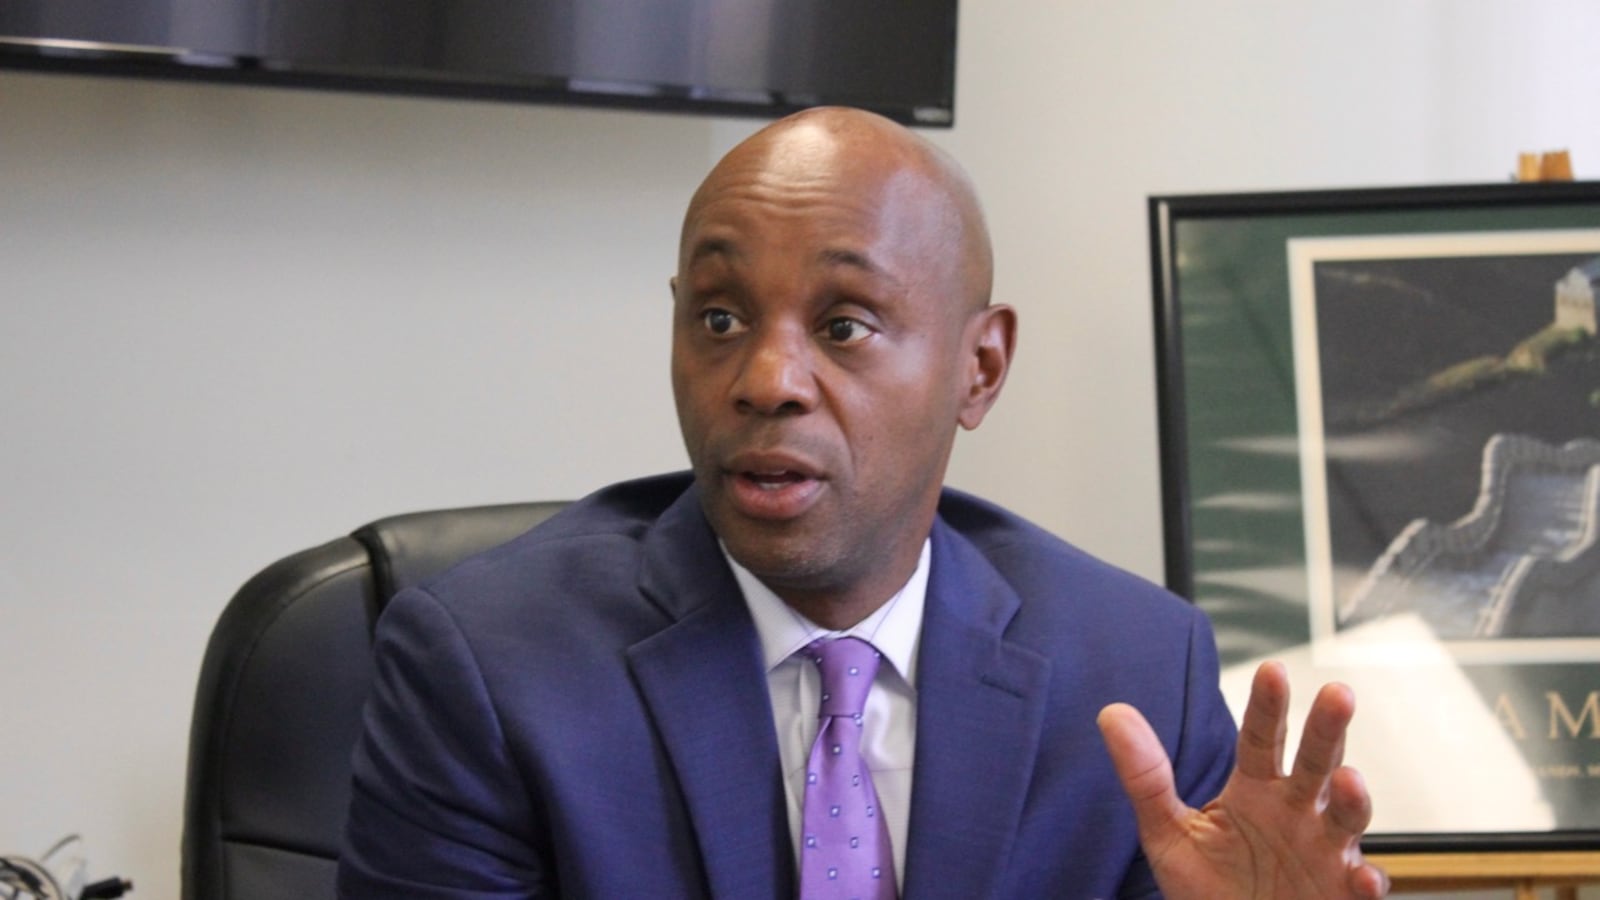 Superintendent Dorsey Hopson is in talks with state officials about the future of American Way Middle, a struggling Memphis school that the state has identified for conversion to a charter school under Shelby County Schools or takeover by Tennessee's Achievement School District.